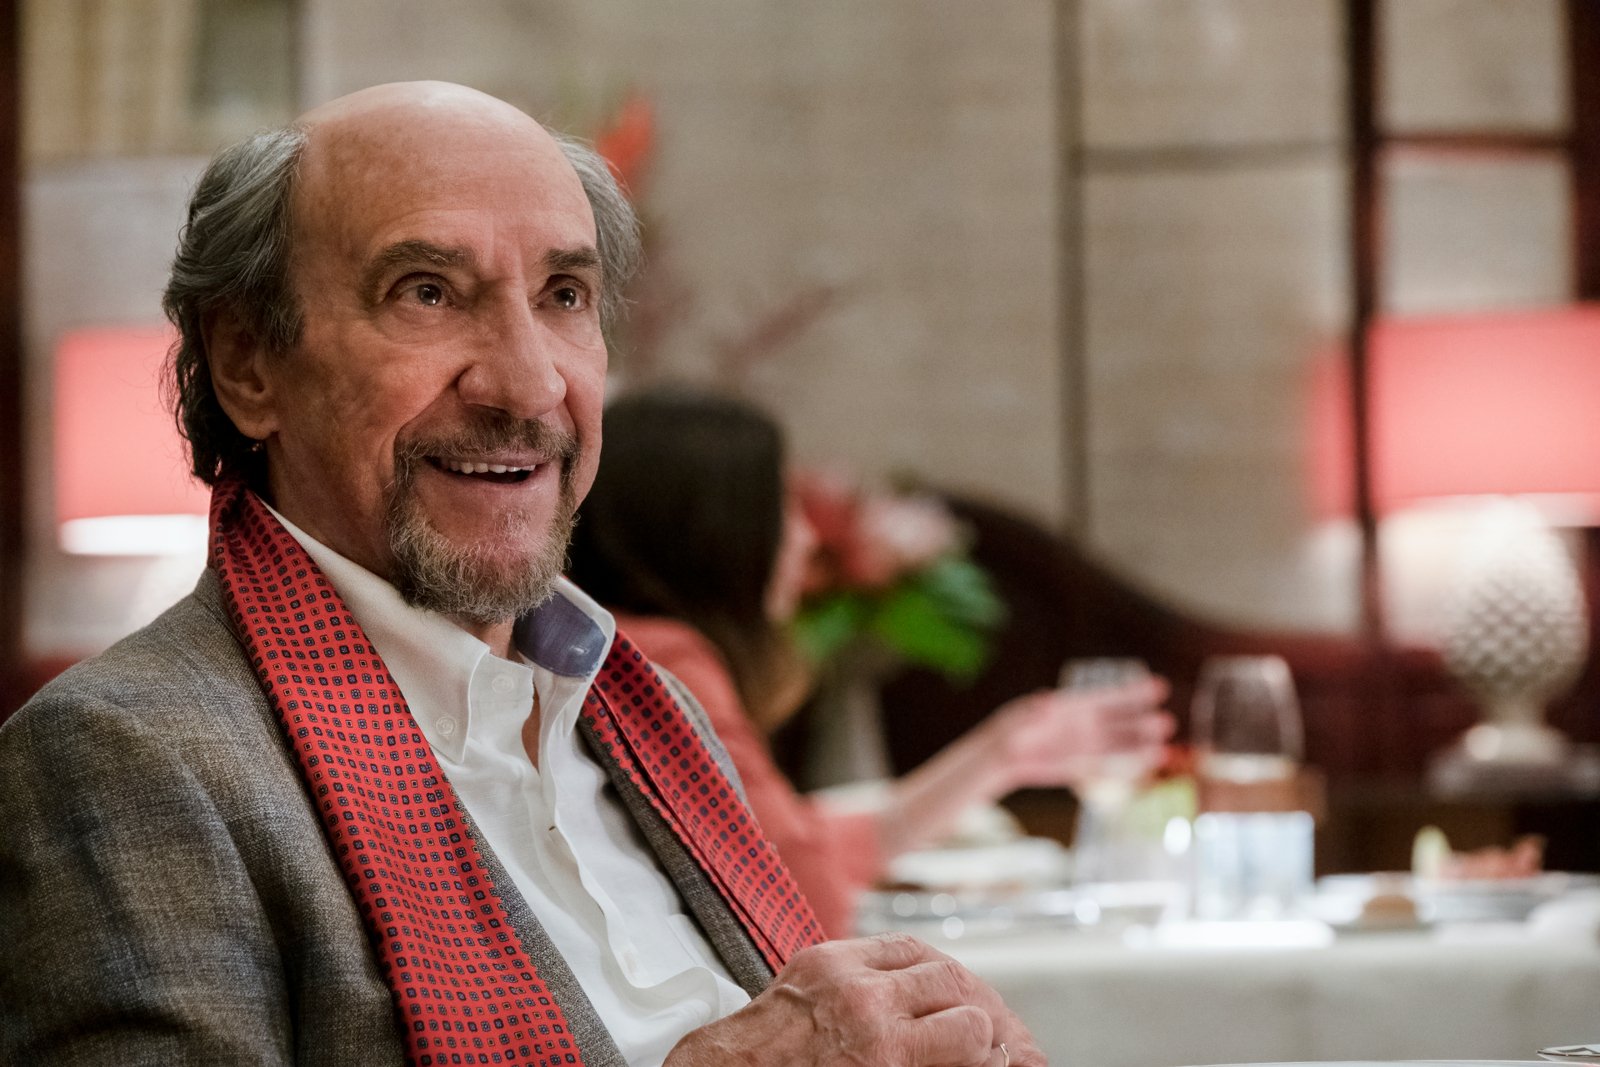 F. Murray Abraham as Bert Di Grasso in 'The White Lotus' Season 2 for our article about his Hades and Persephone comment. He's sitting in a restaurant and wearing a white shirt, grey suit, and pink tie around his shoulders.